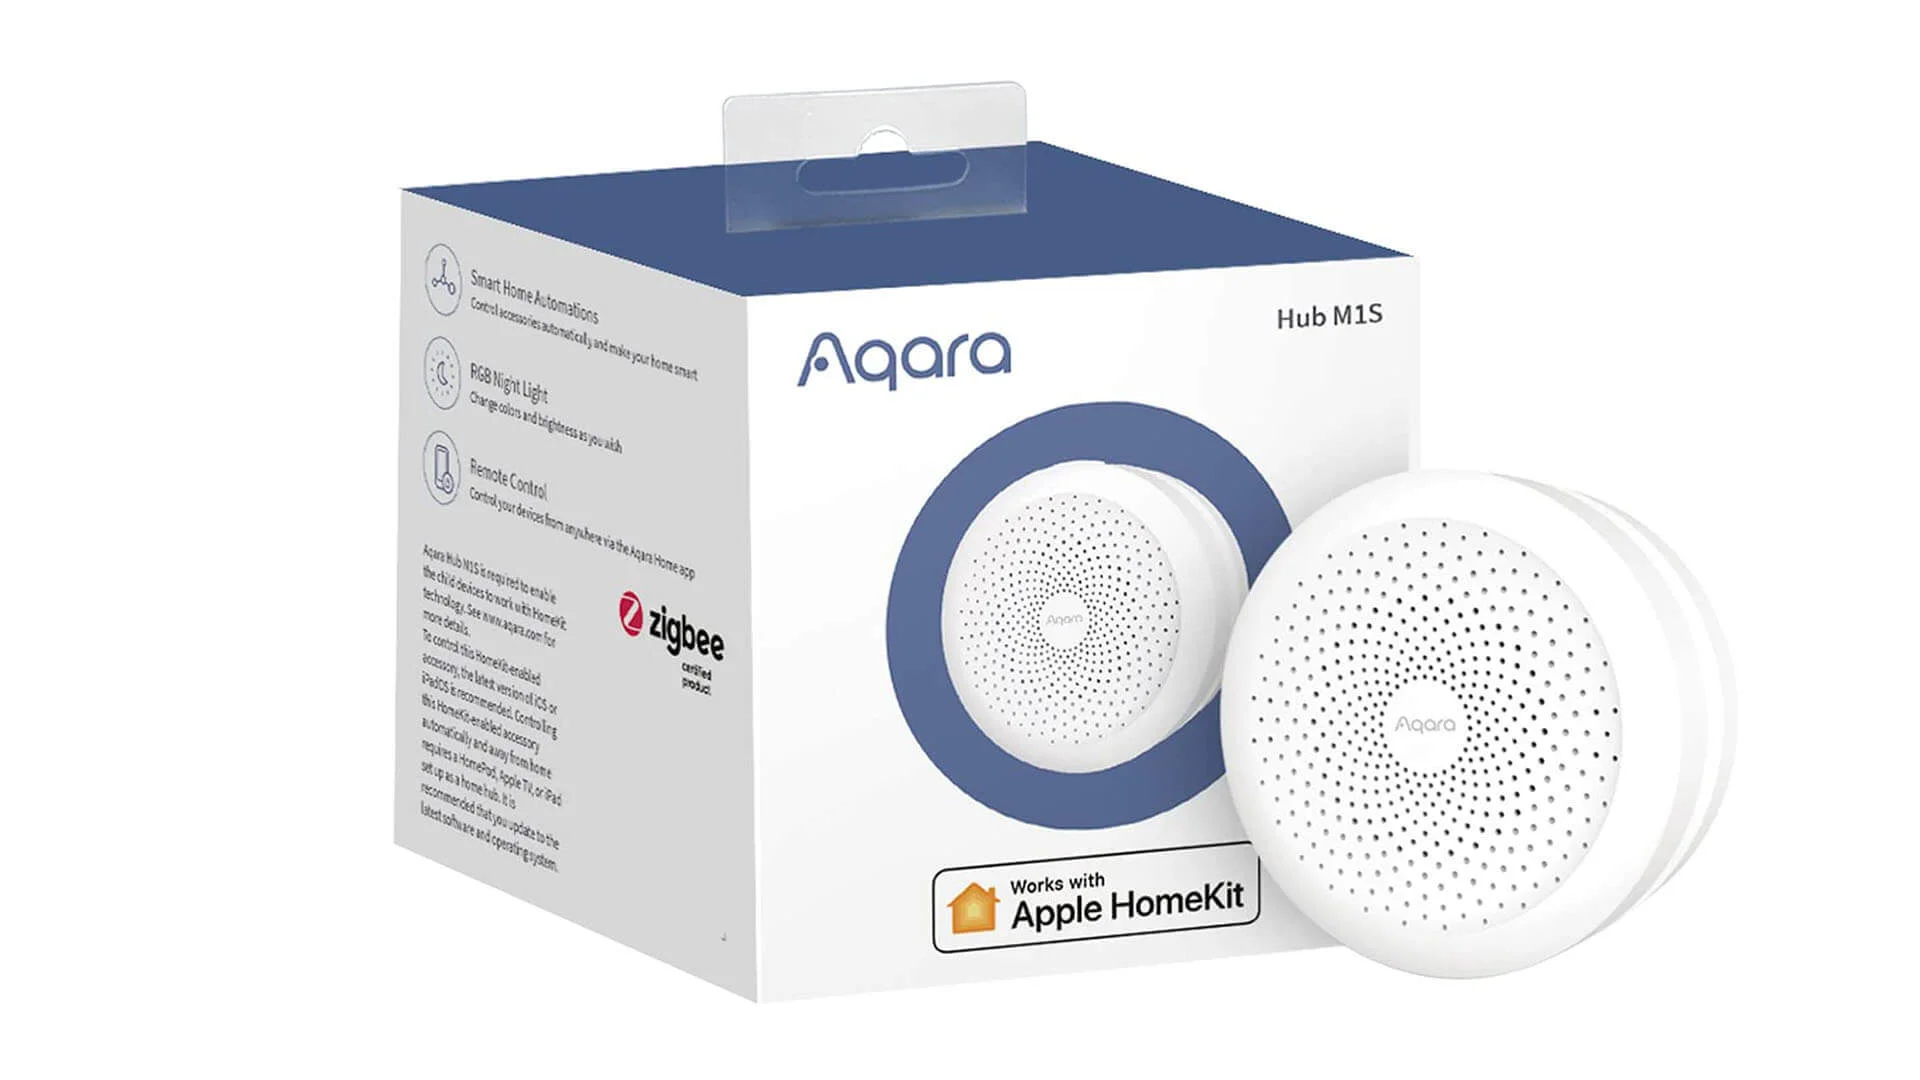 Aqara Hub M3 is a Matter controller and Thread border router